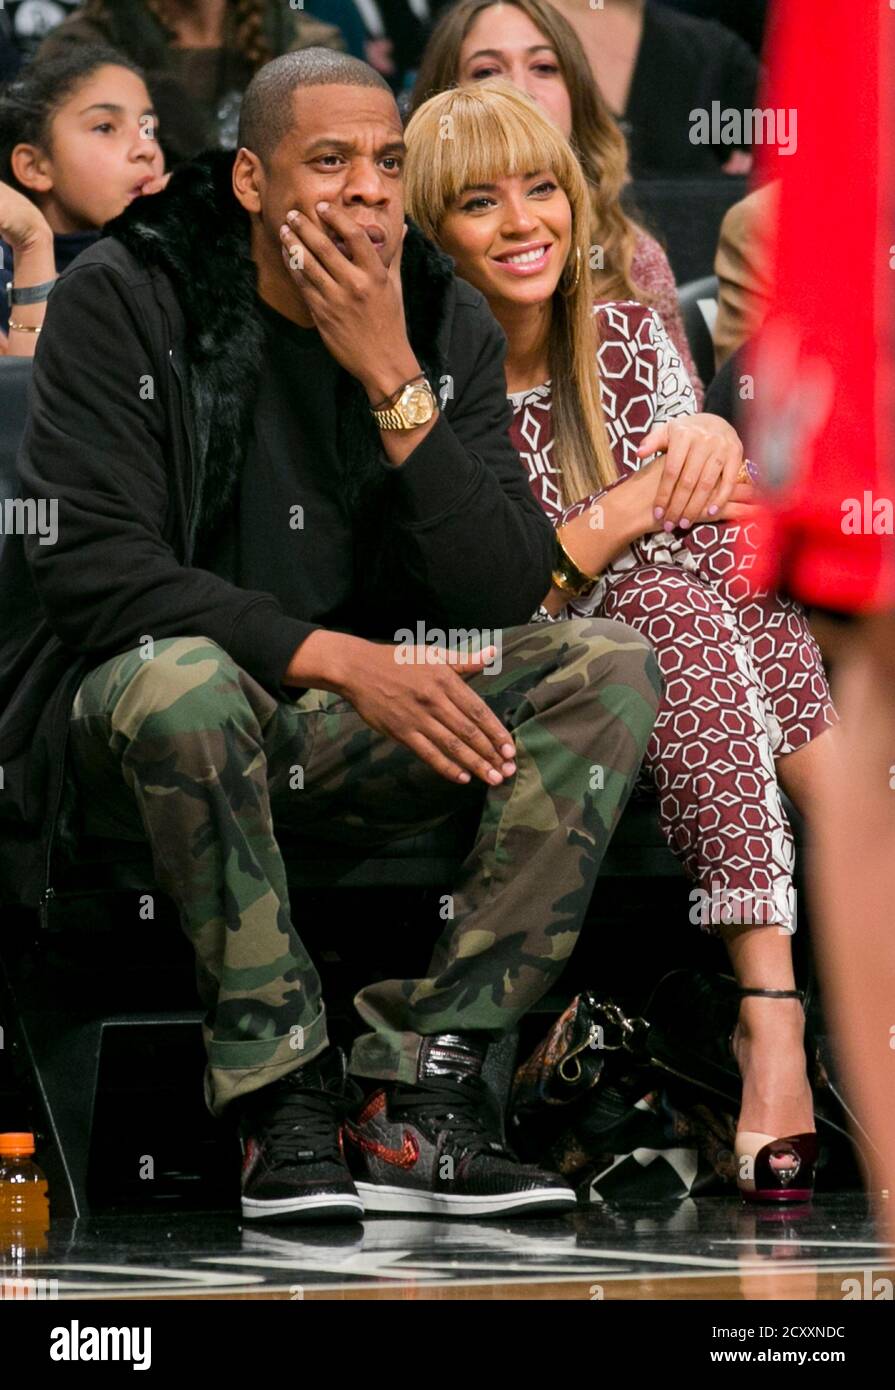 Entertainers Beyonce and Jay-Z watch the Brooklyn Nets play the Toronto  Raptors in the fourth quarter of their NBA basketball game in New York,  November 3, 2012. REUTERS/Ray Stubblebine (UNITED STATES -